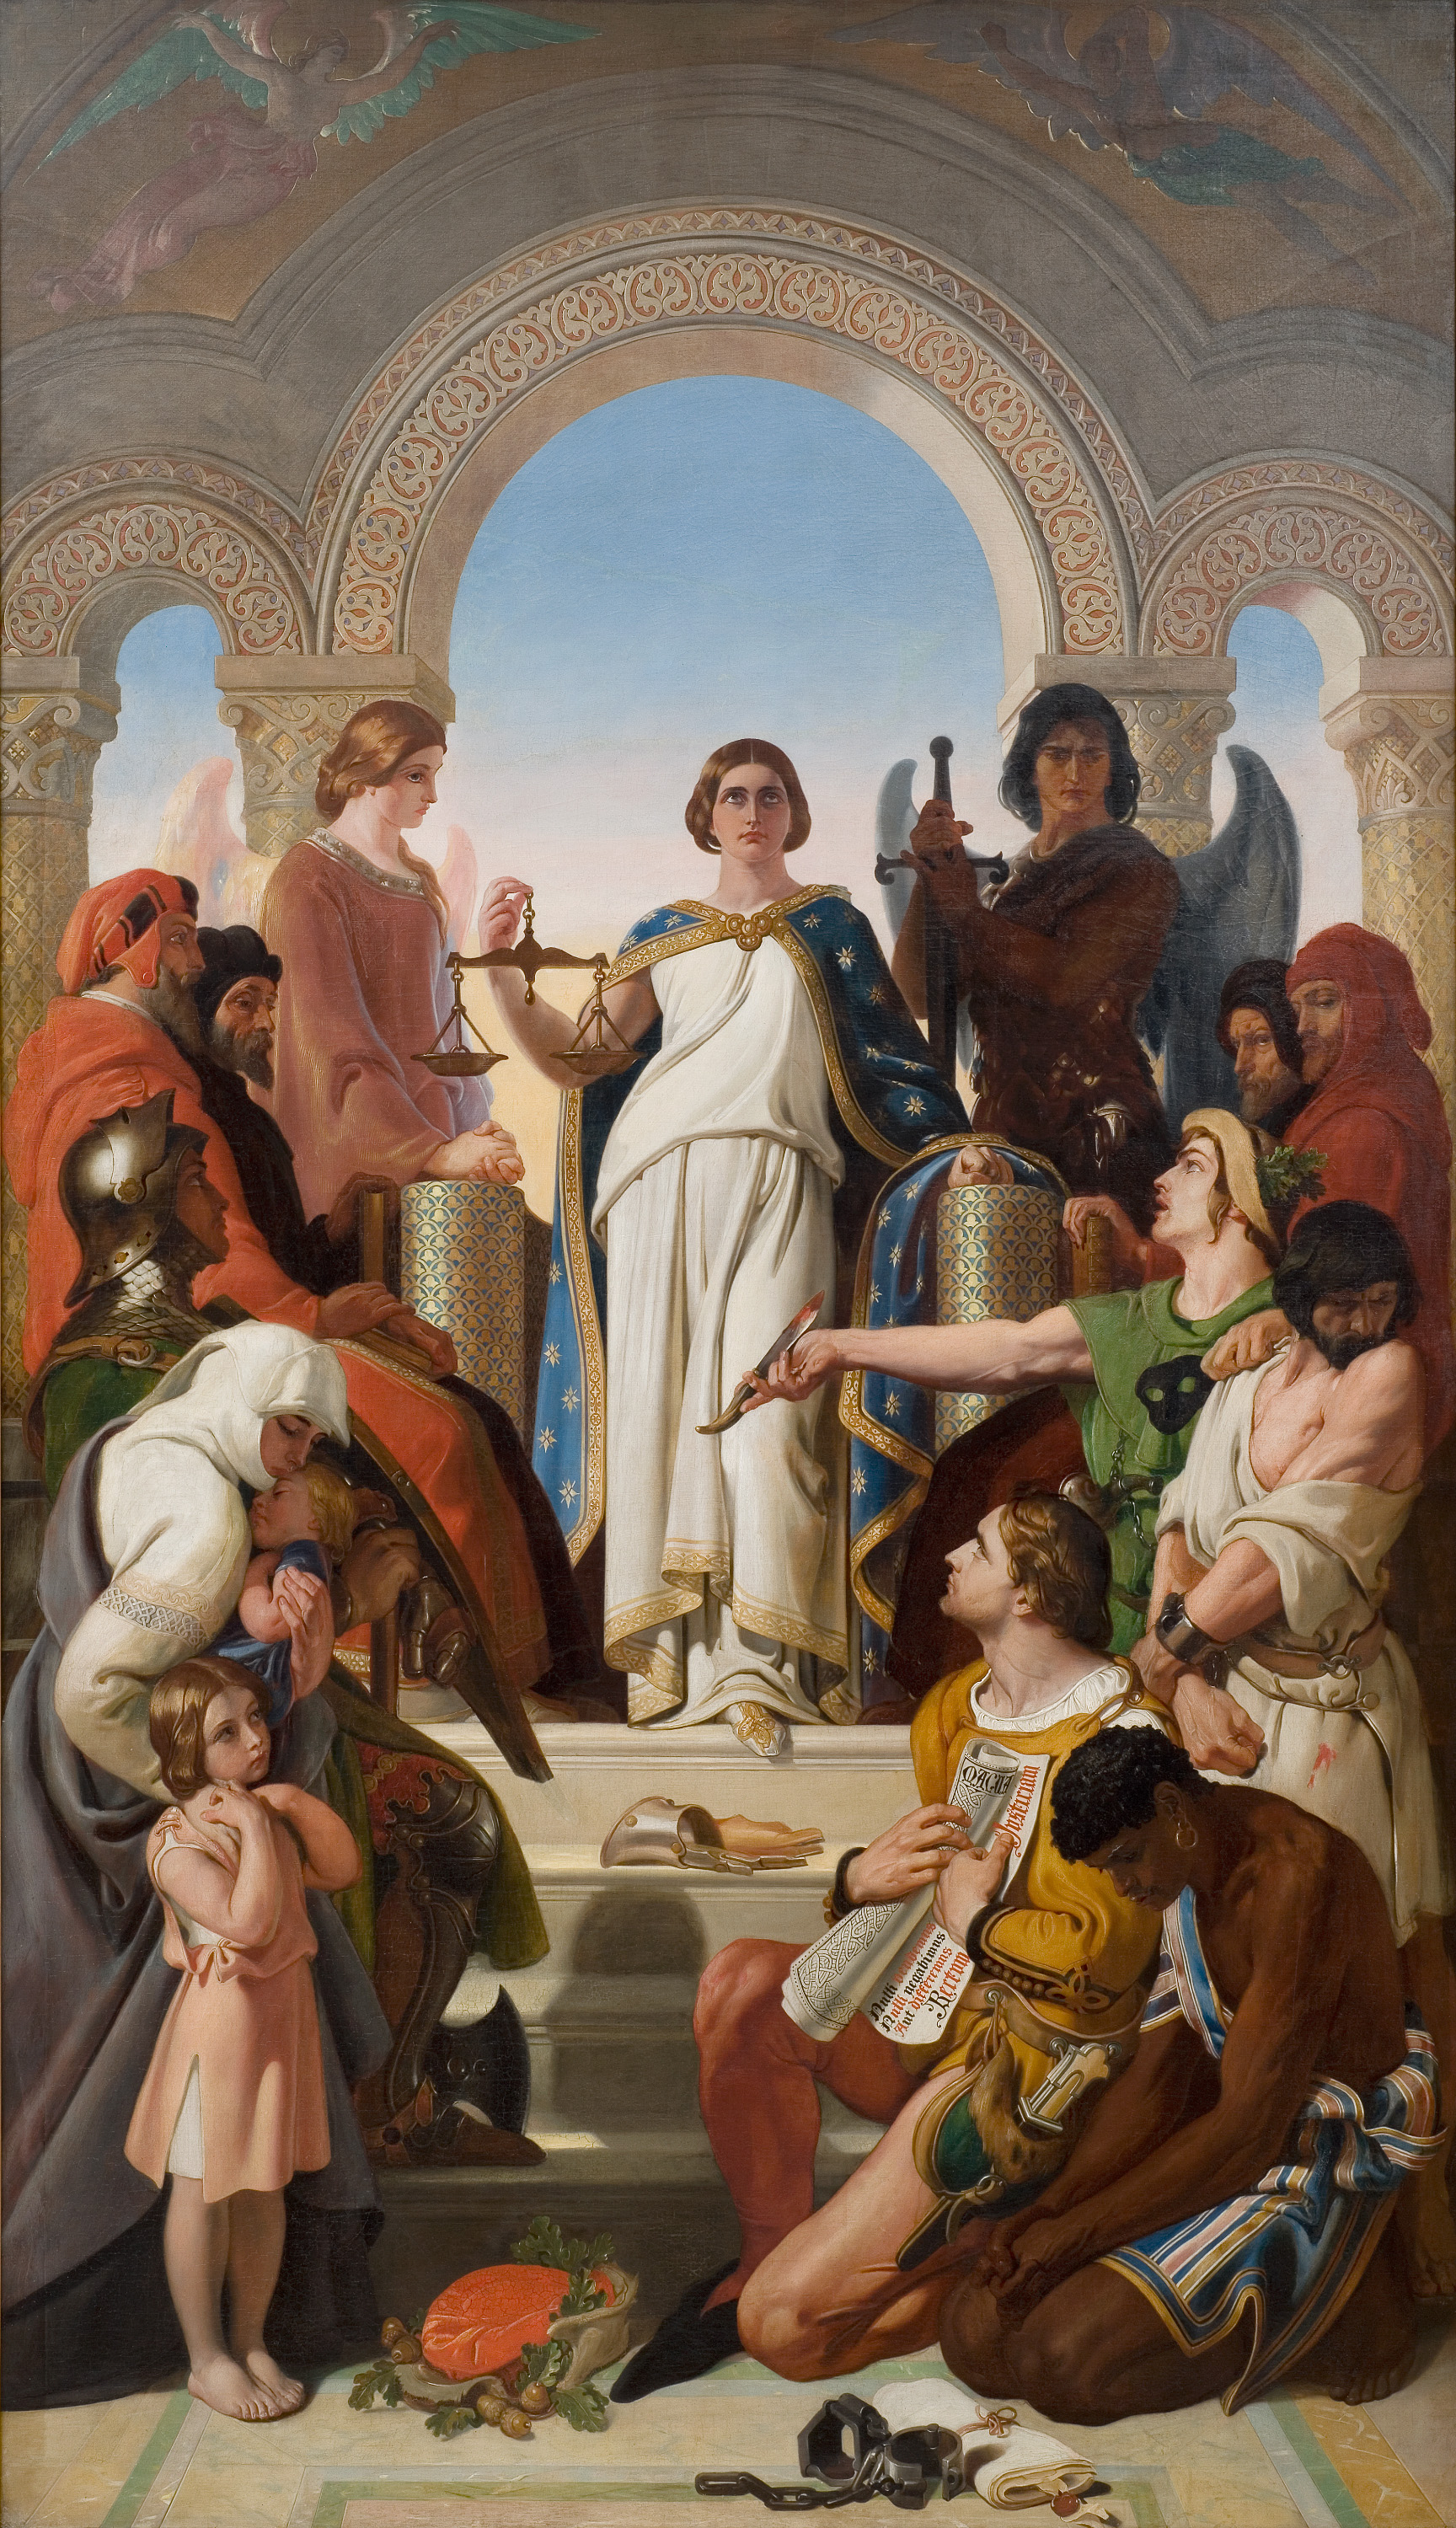 <p><strong>Daniel Maclise</strong><br />
<em>The Spirit of Justice </em>1850<br />
Mackelvie Trust Collection, Auckland Art Gallery Toi o Tāmaki<br />
gift of James Tannock Mackelvie, 1881</p>
